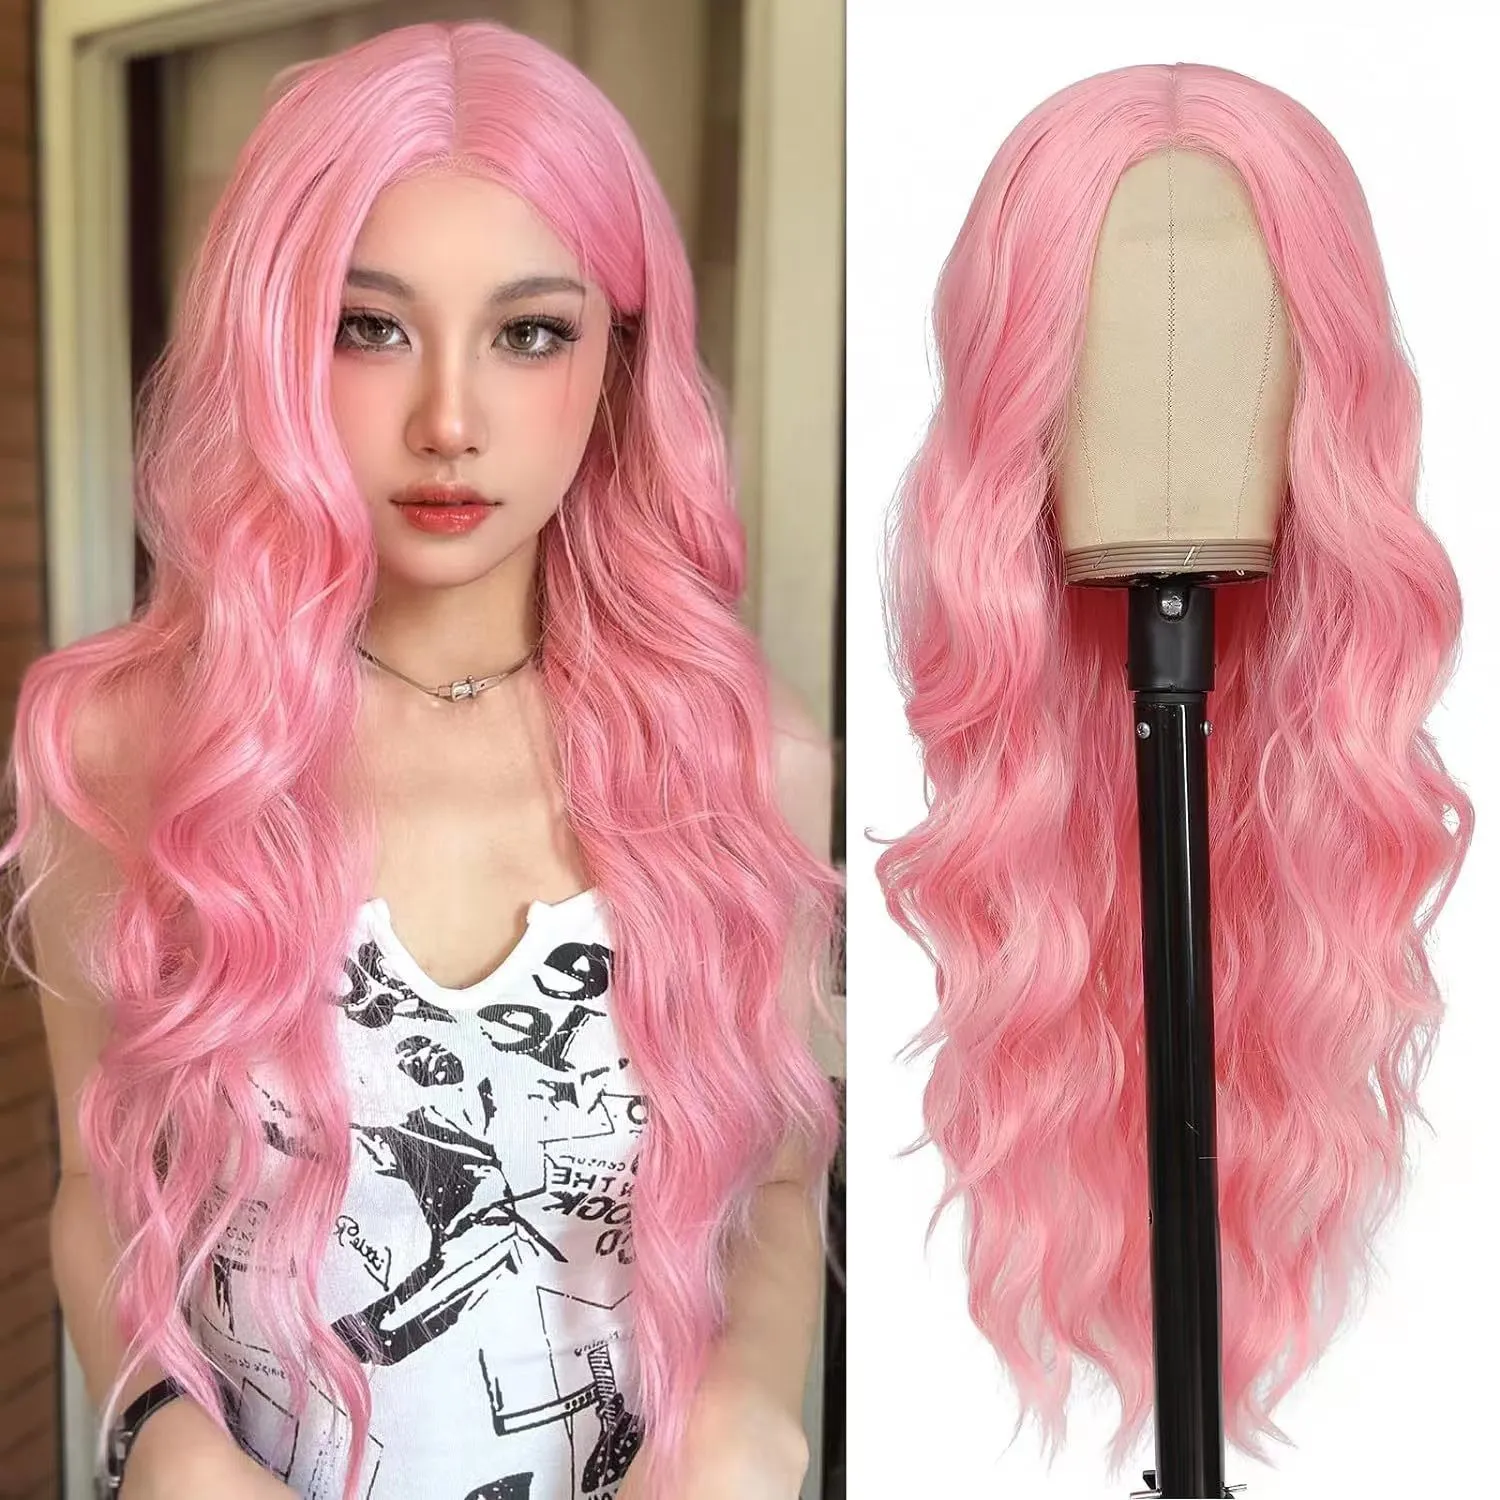 Long Deep Wave Full Lace Front Wigs Human Hair curly hair 2 styles pink and red color wigs female lace wigs synthetic natural hair lace wigs fast